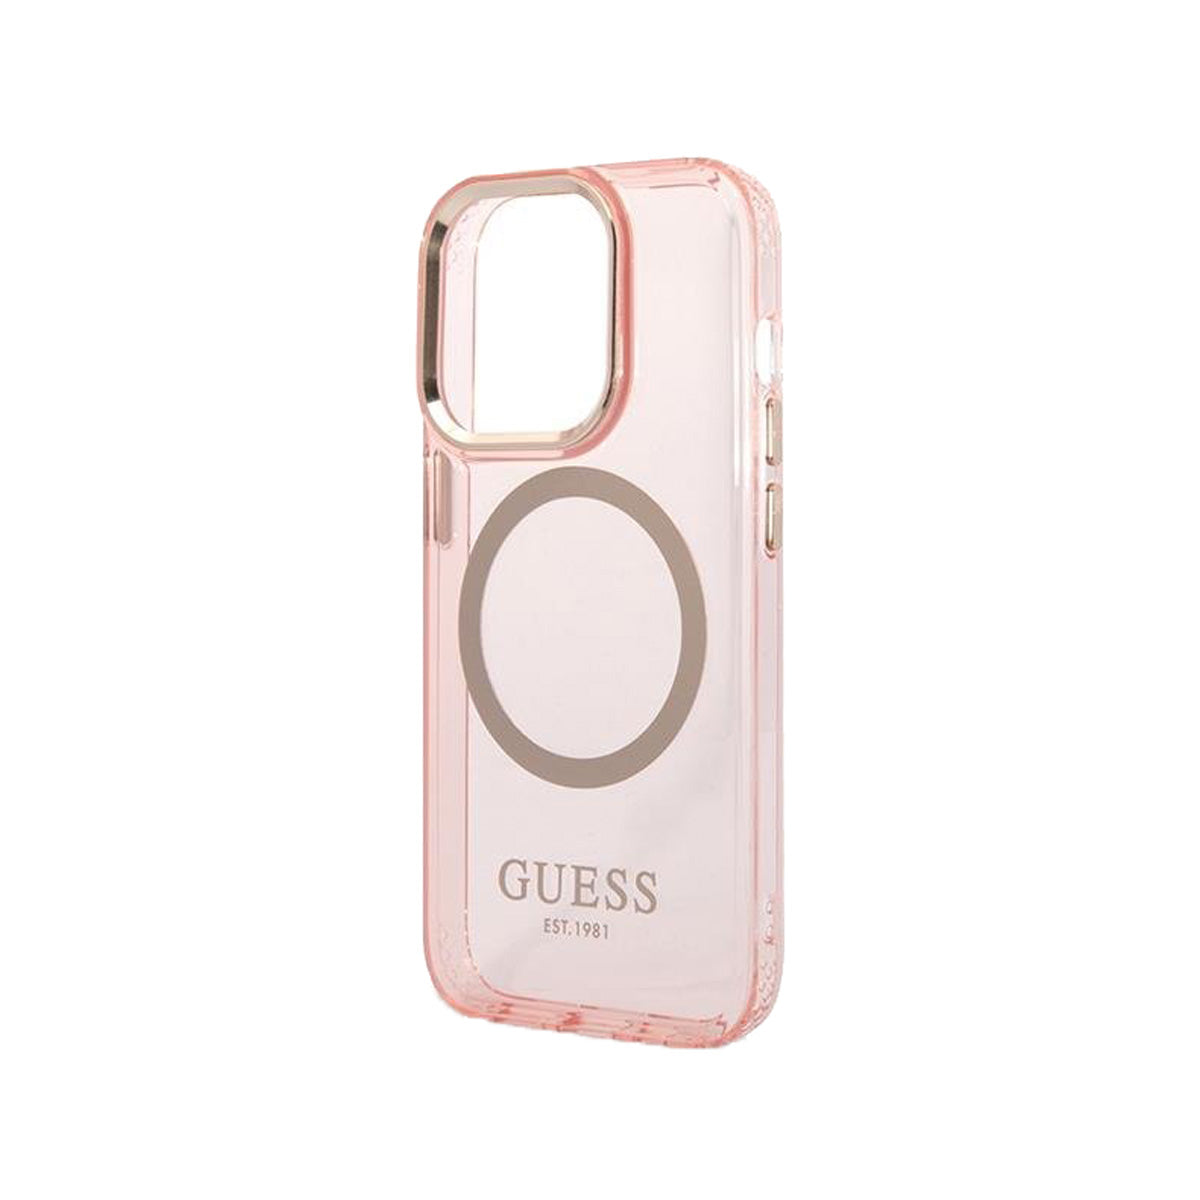 GUESS Ring Edition Case For iPhone 14 Pro Max - Translucent Black